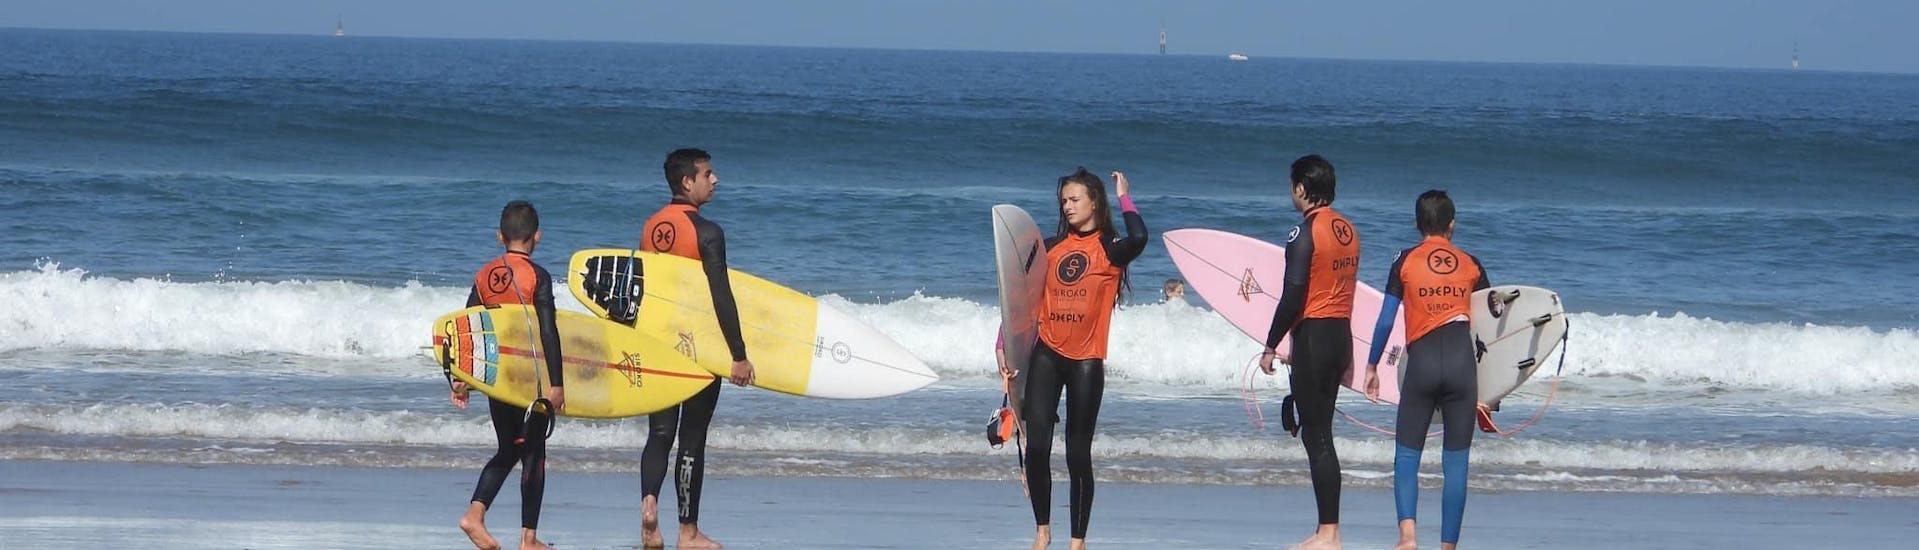 Surfing Lessons in Gijón for Beginners.